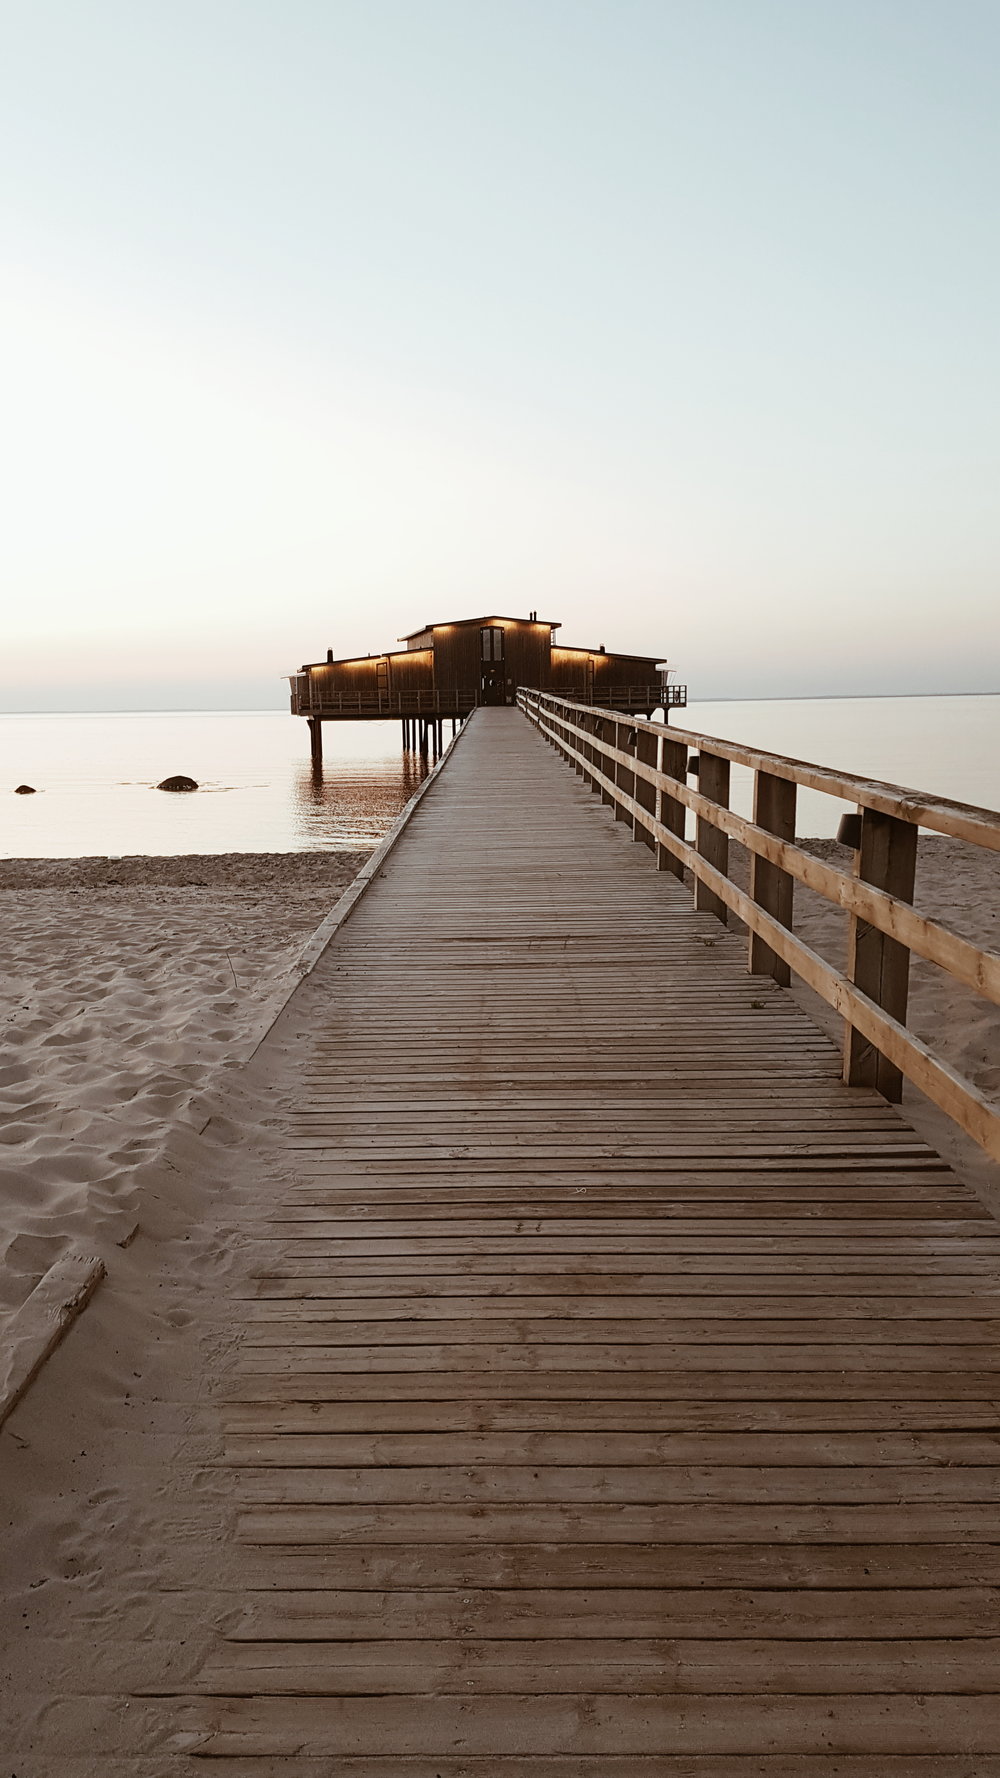  The stunning beach that Hotel Skansen overlooks and the sauna at the end of the pier for use by hotel residents 